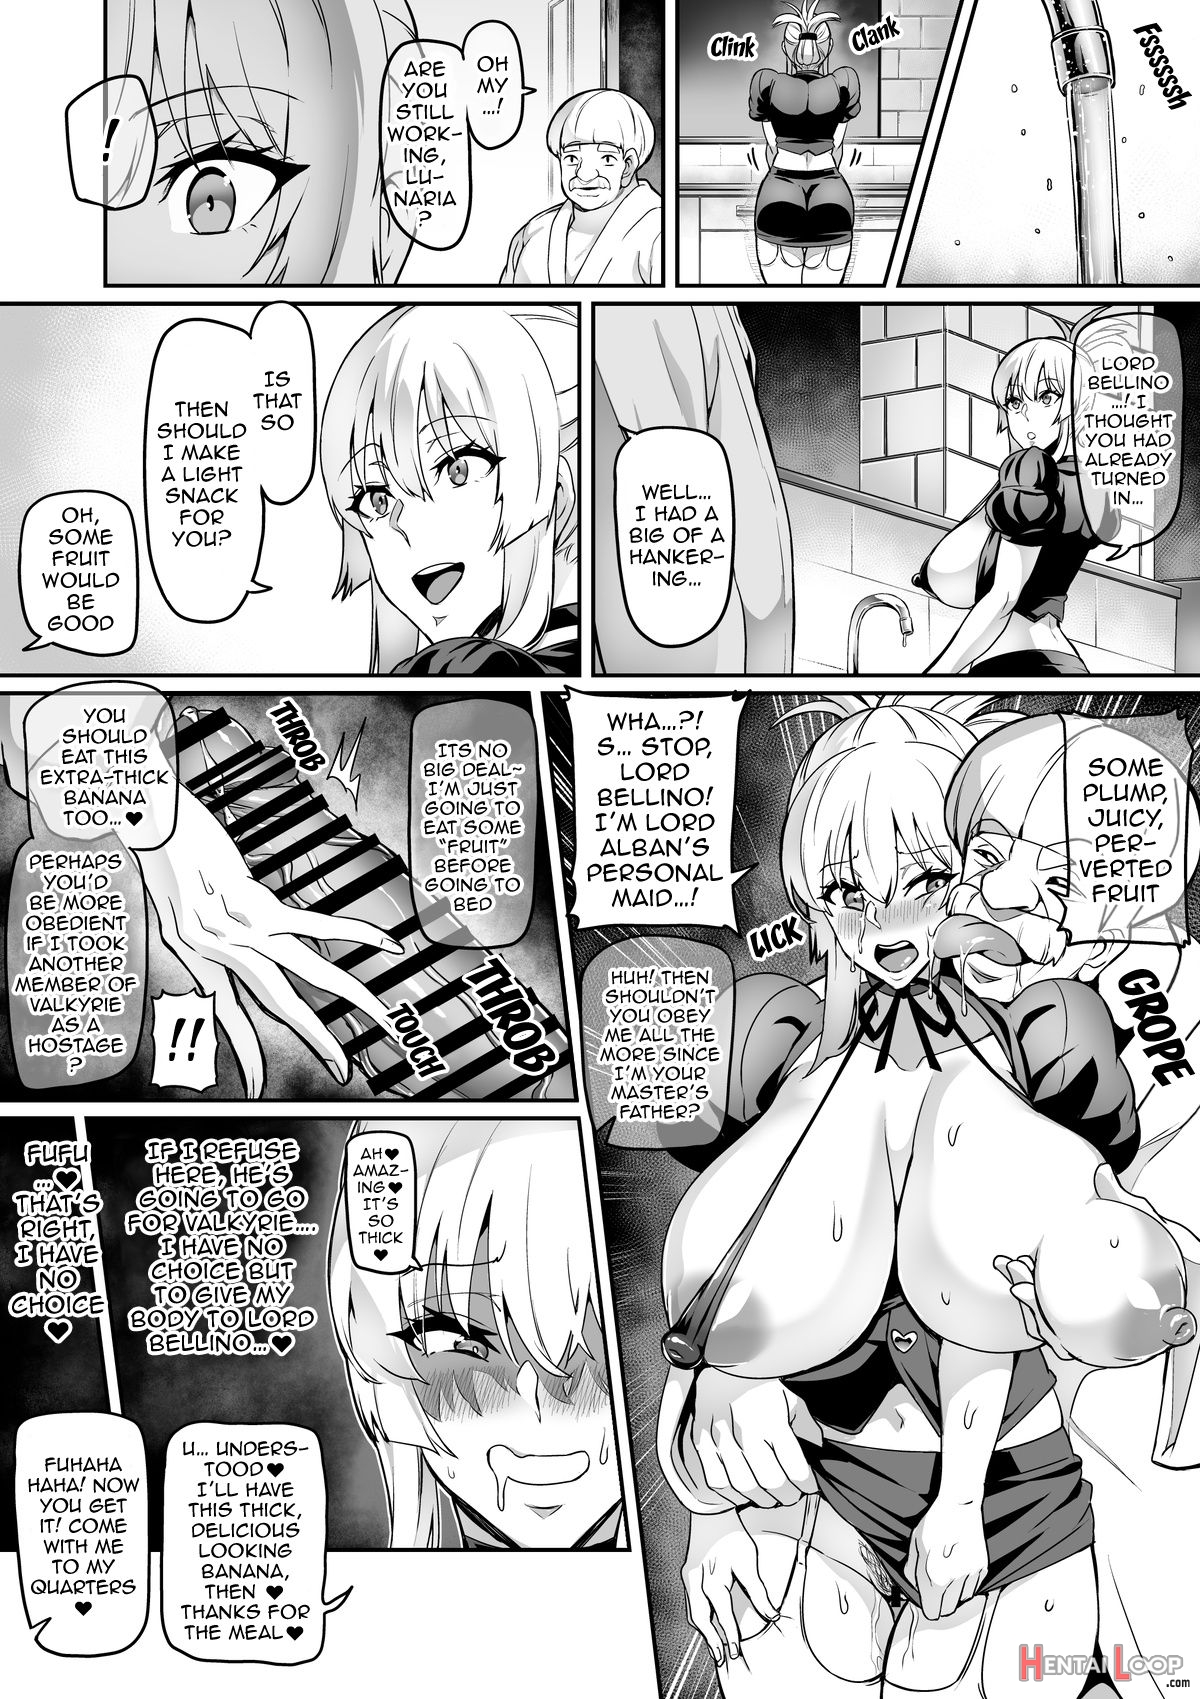 Demon Slaying Battle Princess Cecilia If Lunaria And The Trap Of The Perverted Royal Family ~feces Serving Edition~ page 7